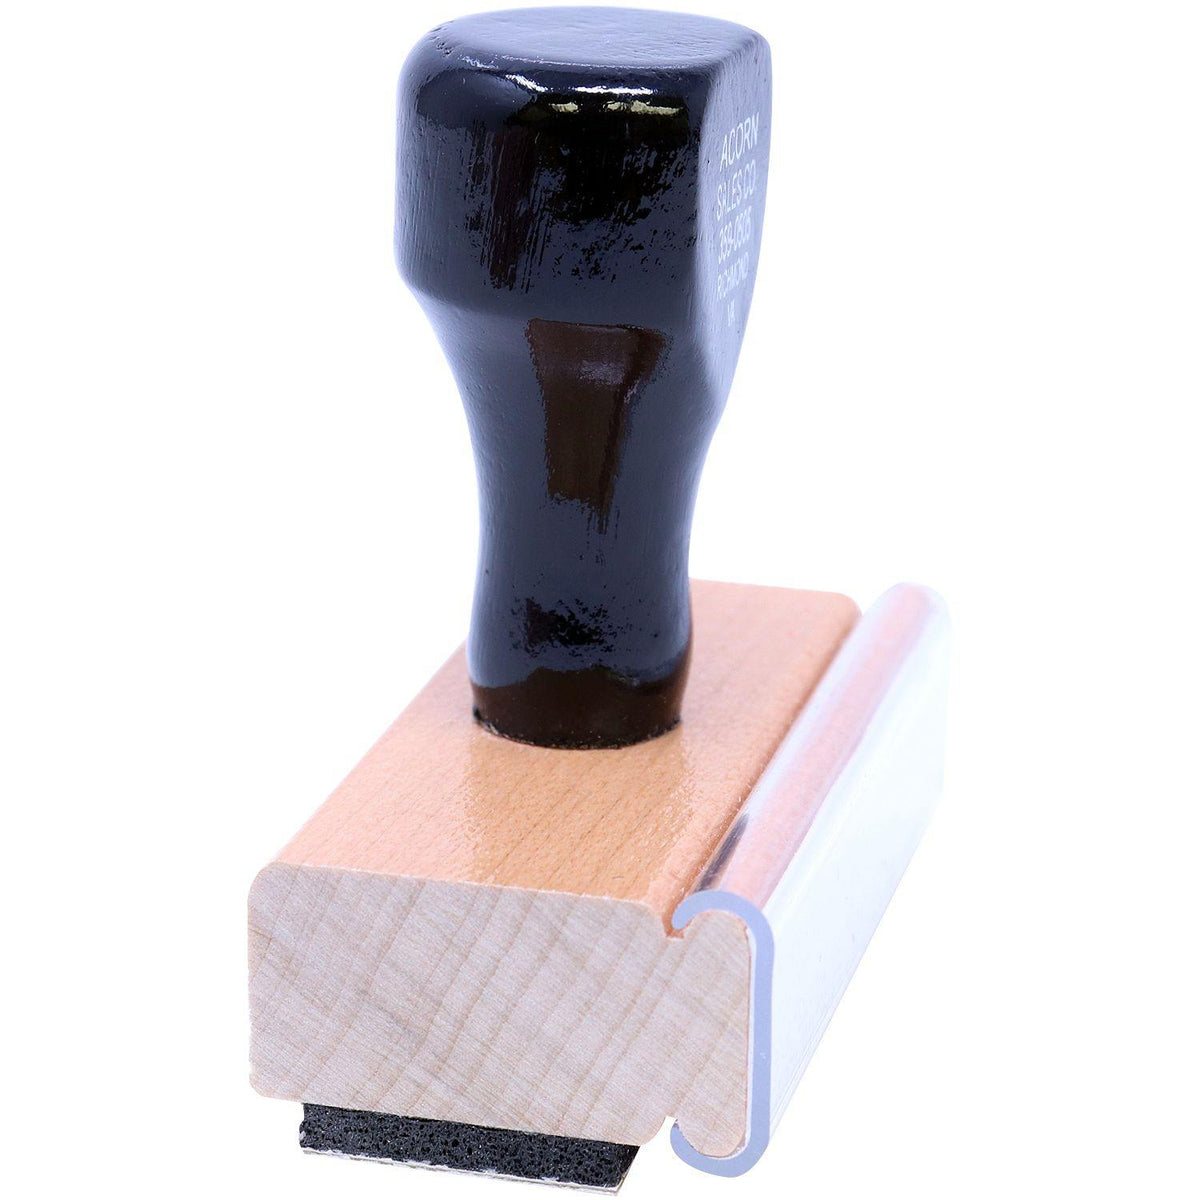 Side View of Large Insured Rubber Stamp at an Angle